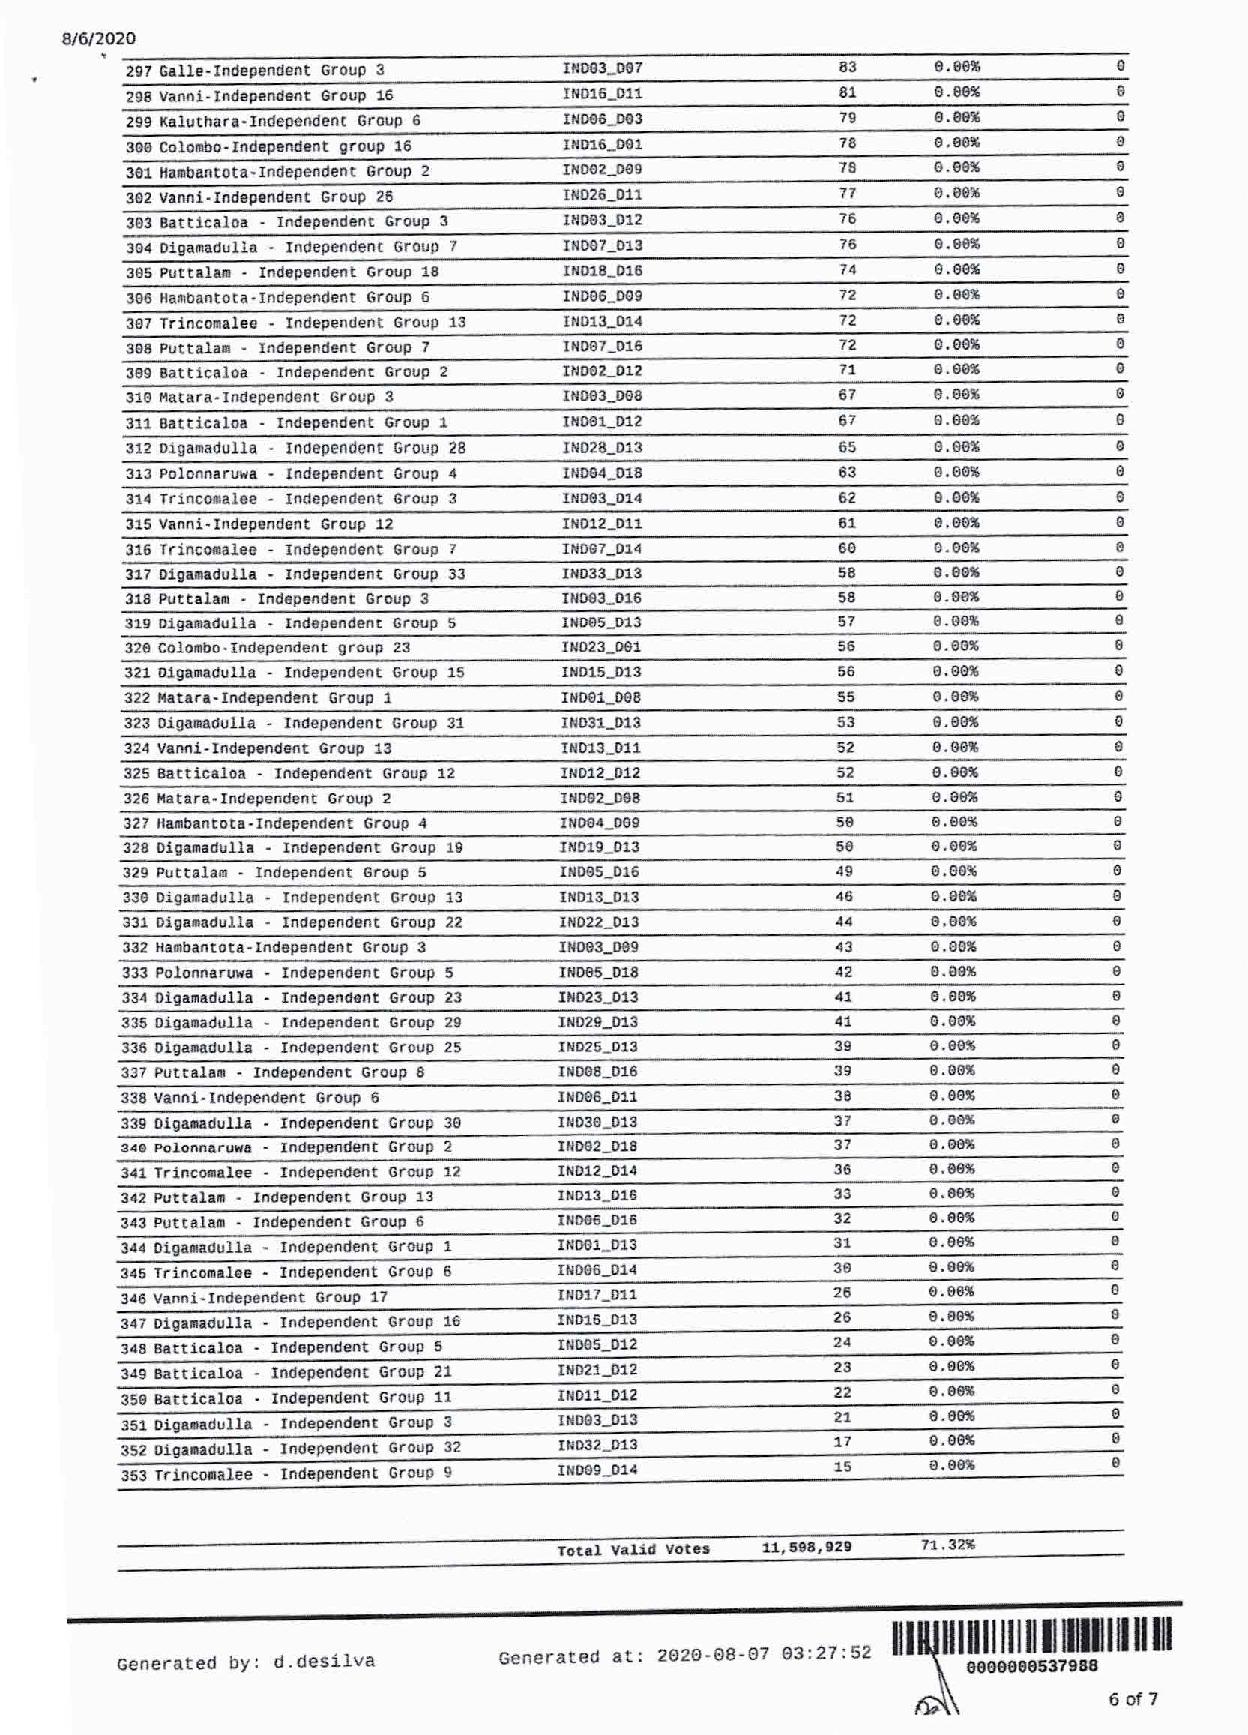 National List page 006